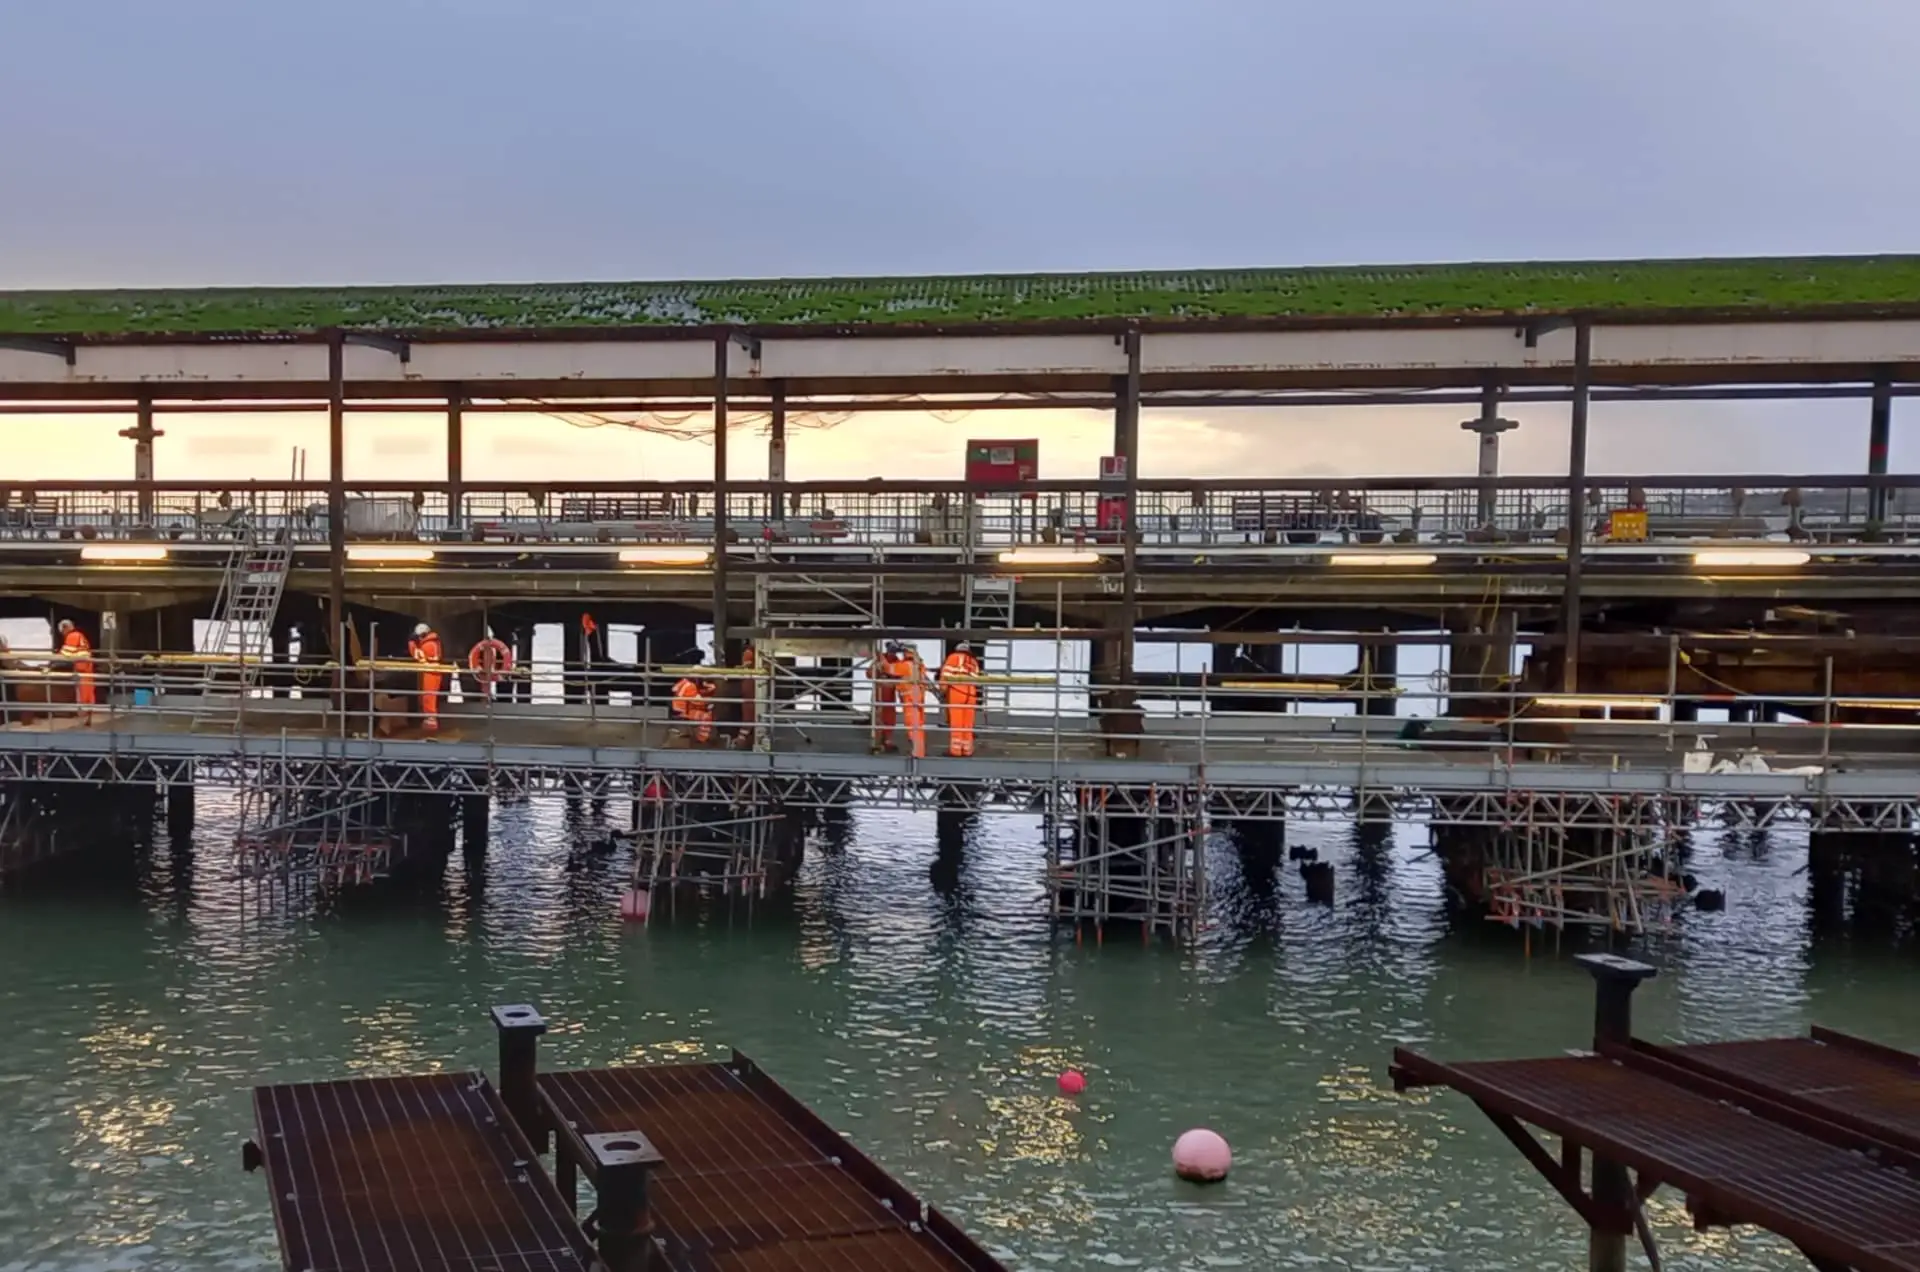 Working on Ryde Pier